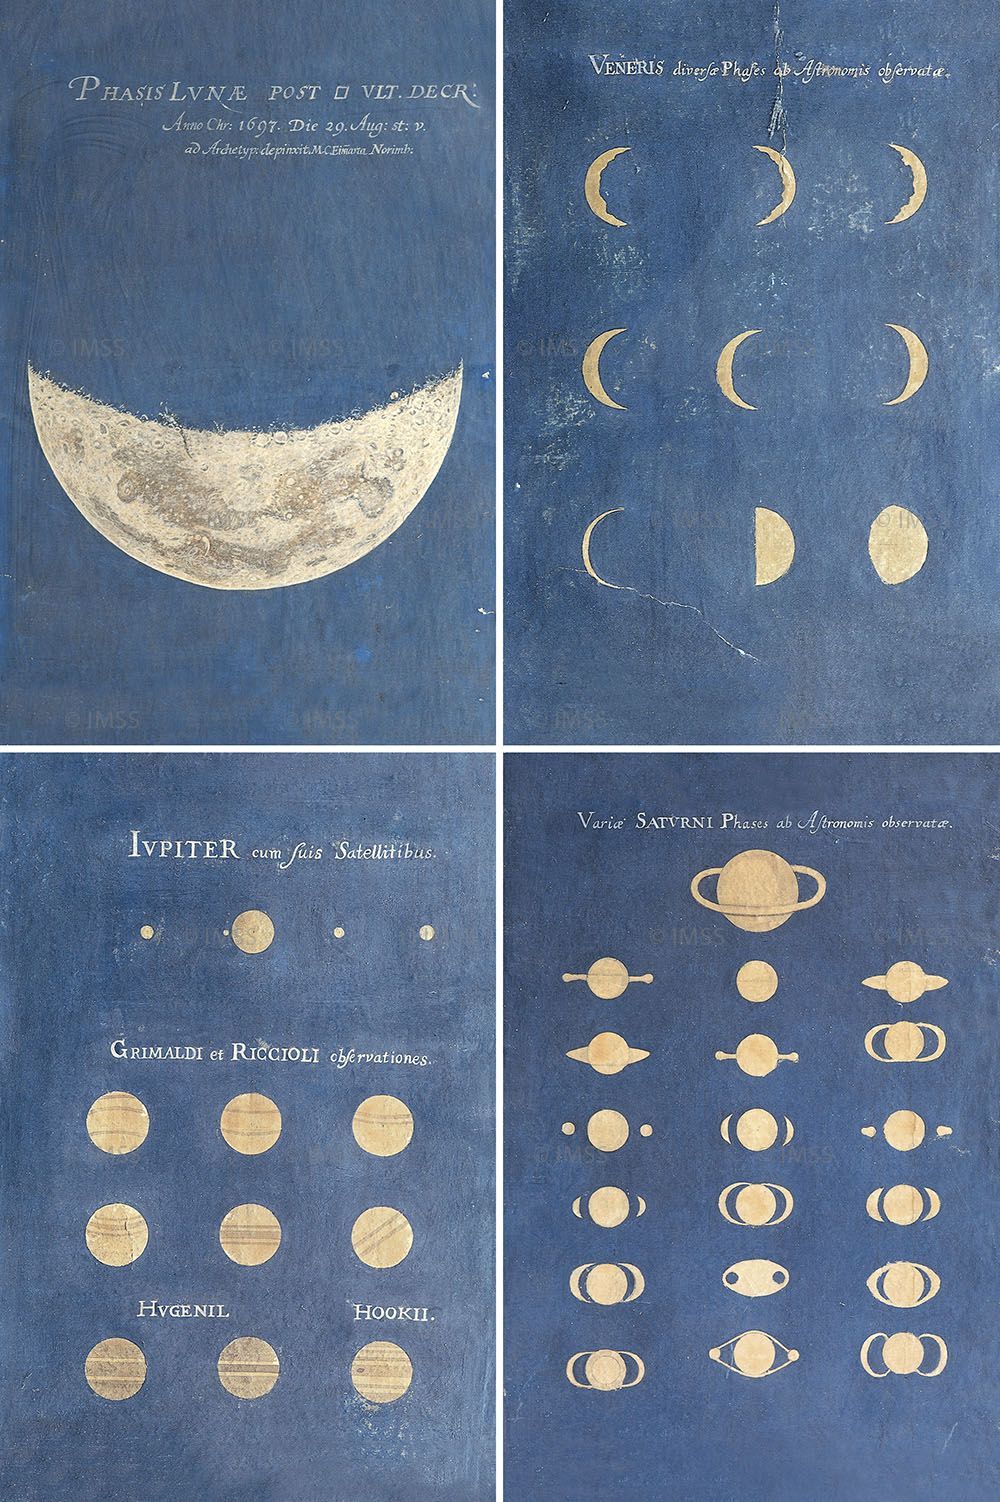 phases of the moon galileo archive